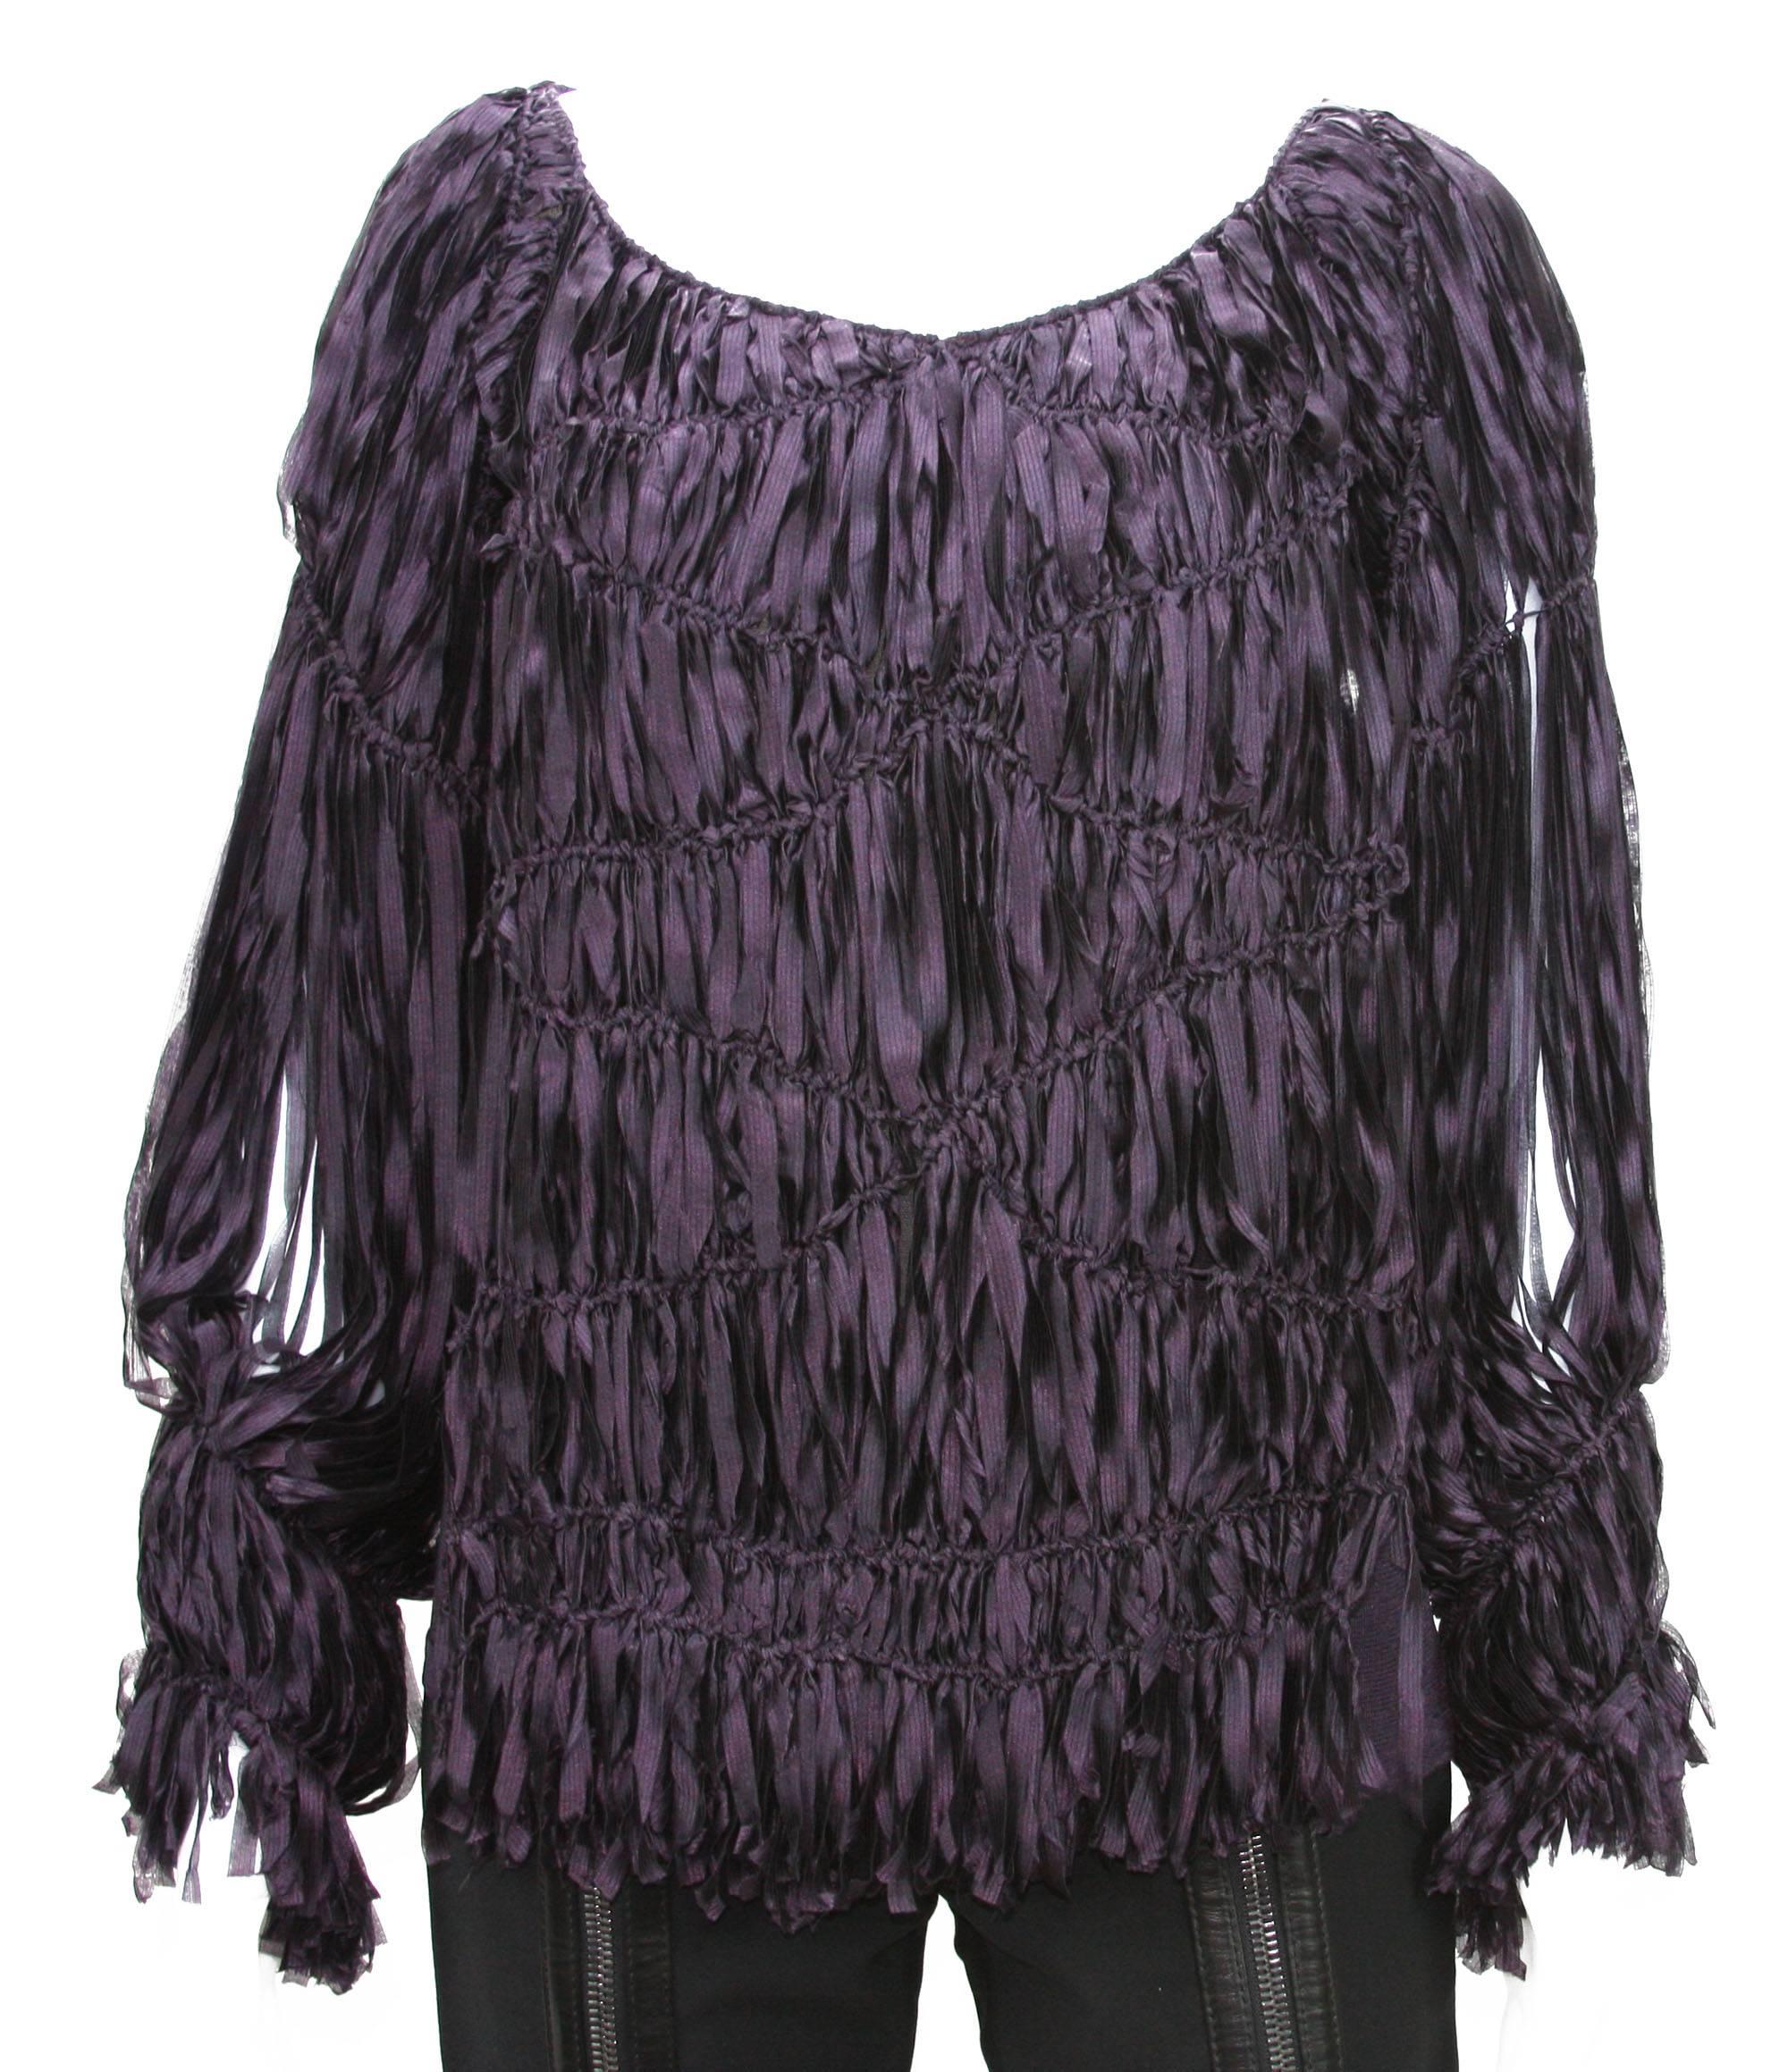 Tom Ford for Yves Saint Laurent 
Fall / Winter Runway 2001 Collection
Designer Size - M
100% Silk (stretch), Dark Purple Shredded Sweater ( Top)
Measurements flat: length - 22 inches, bust - 16